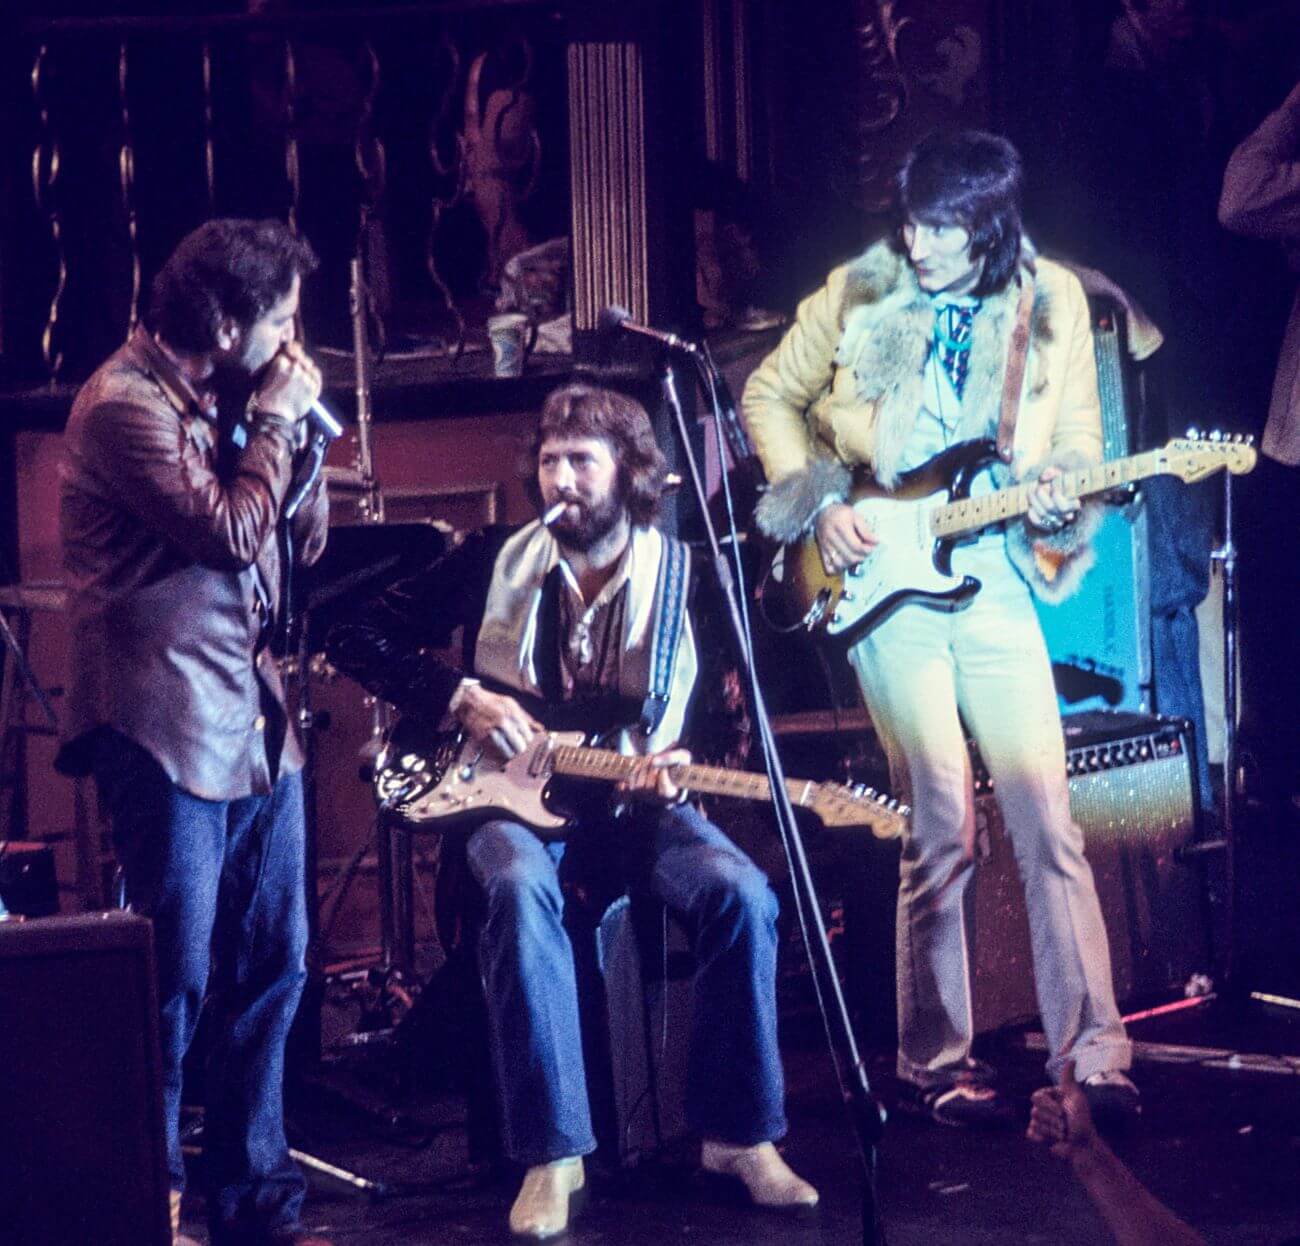 Paul Butterfield holds a microphone next to Eric Clapton and Ronnie Wood, who play guitars.